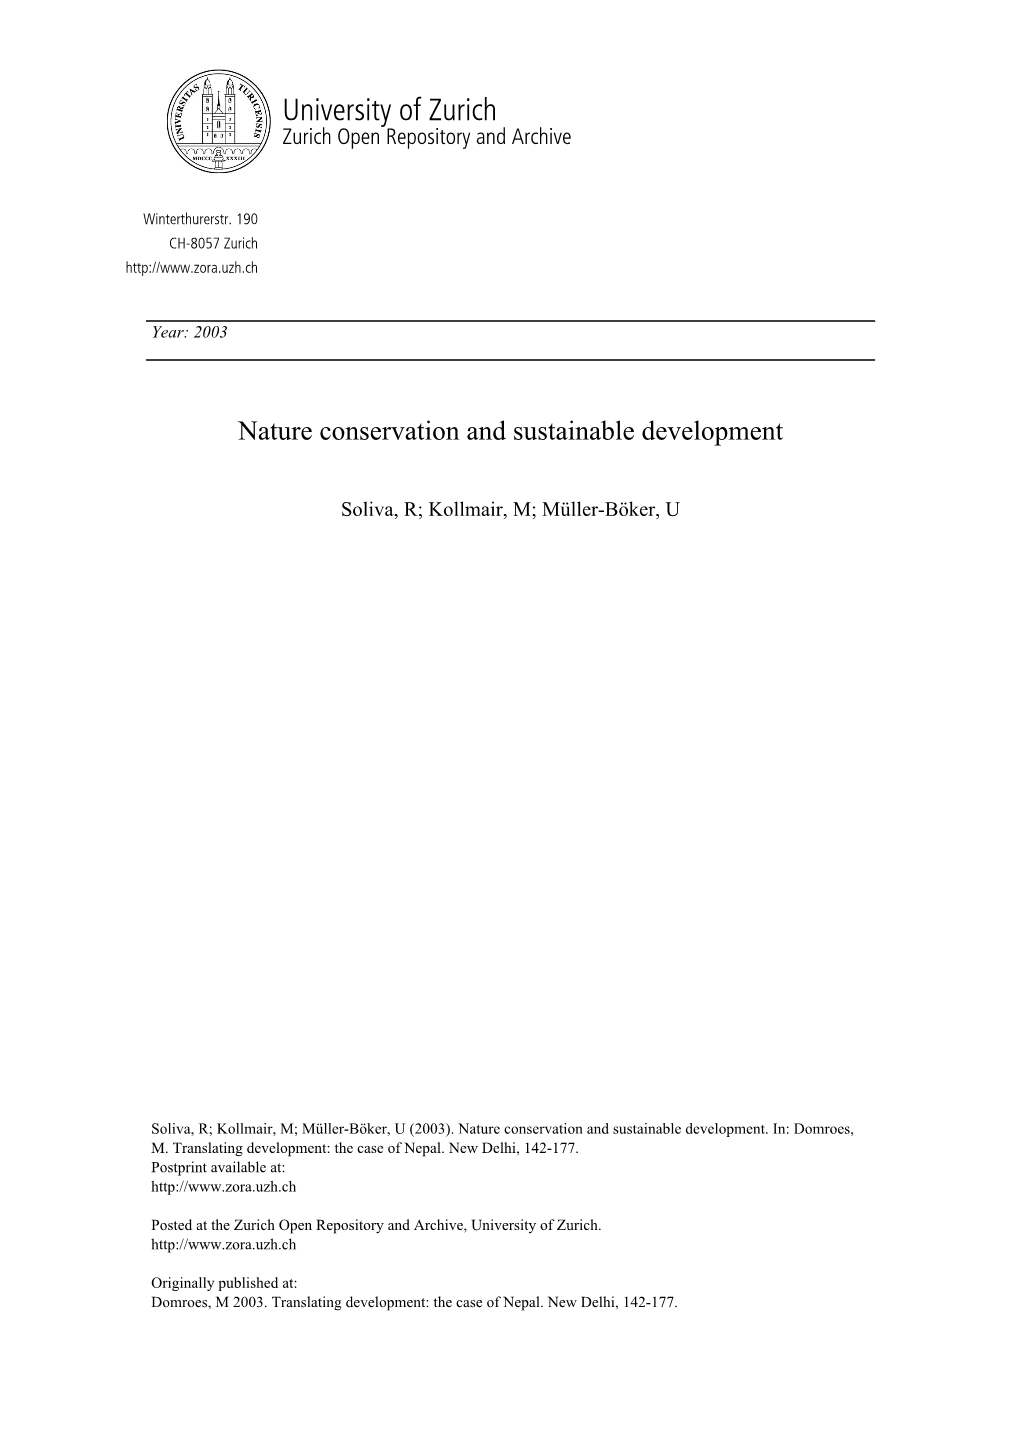 'Nature Conservation and Sustainable Development'